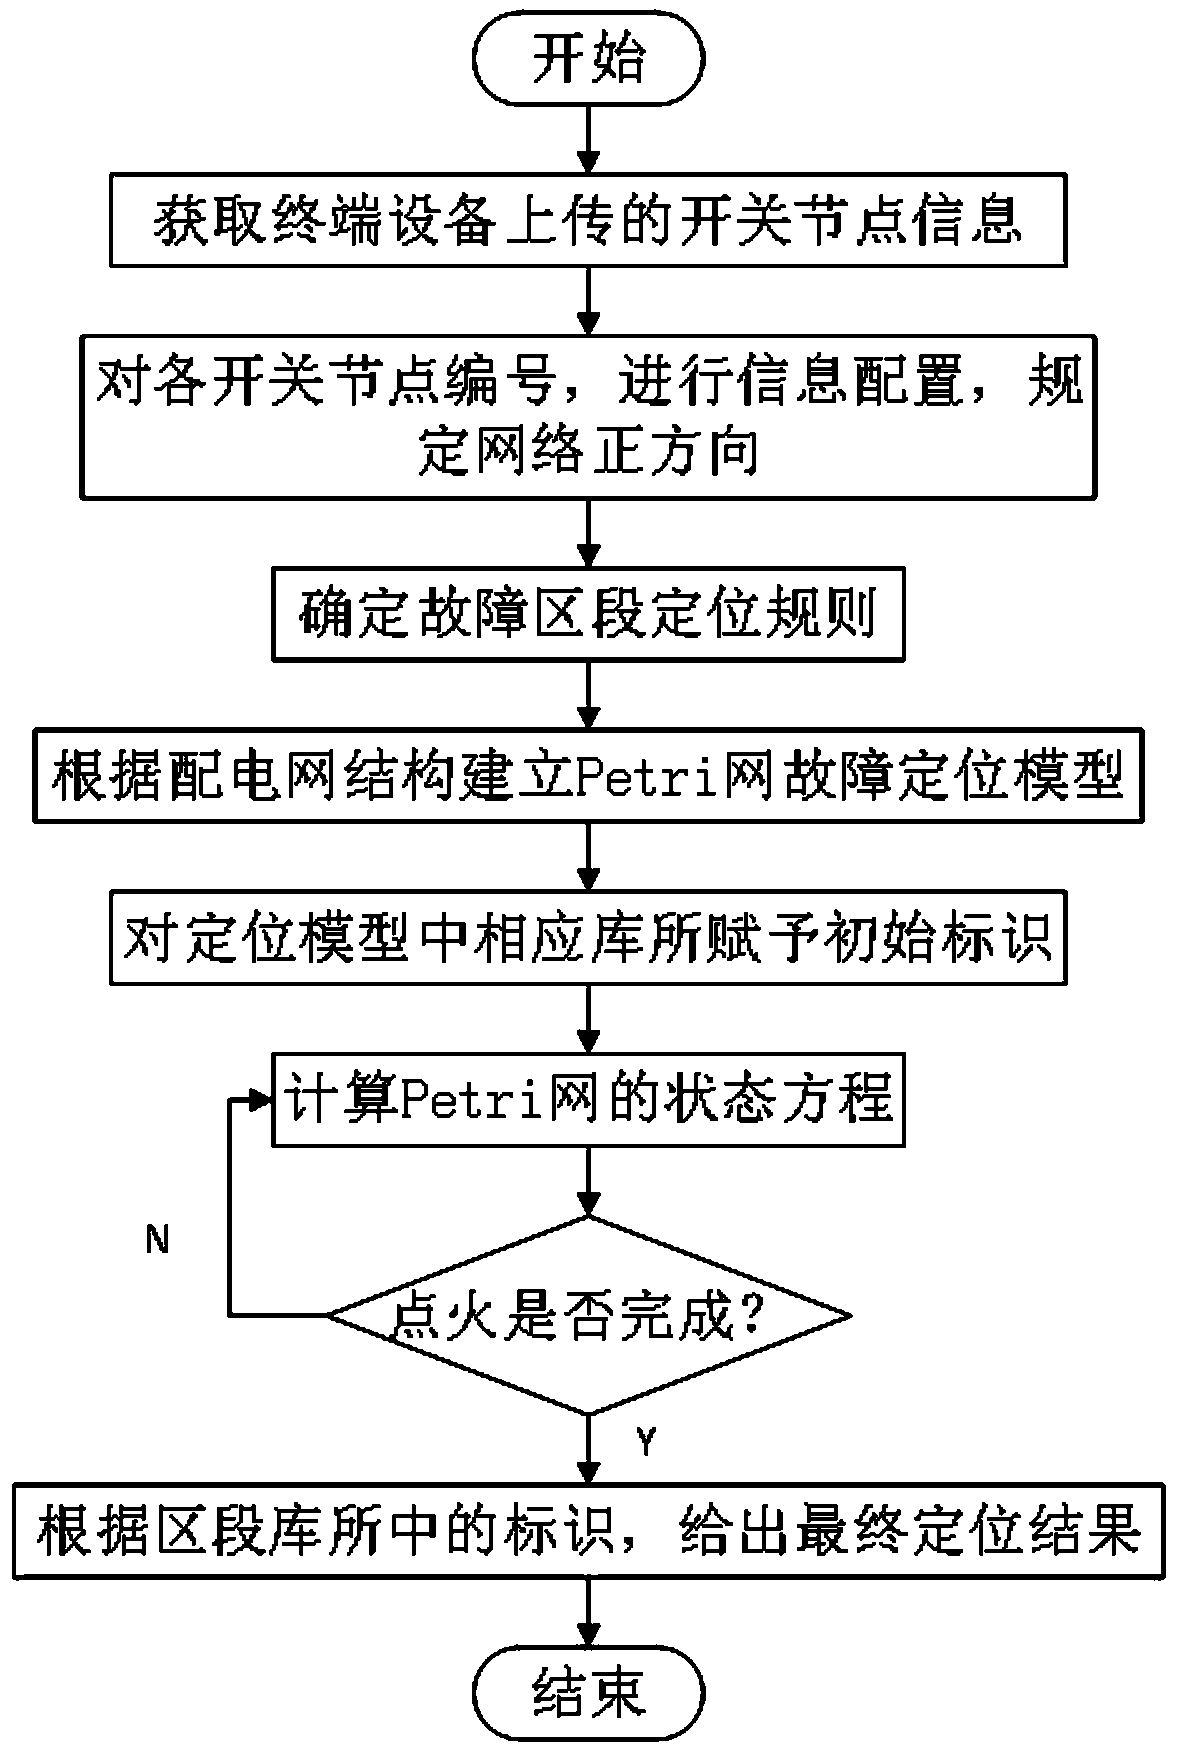 Fault diagnosis method for power distribution network including high density roof photovoltaic based on Petri network